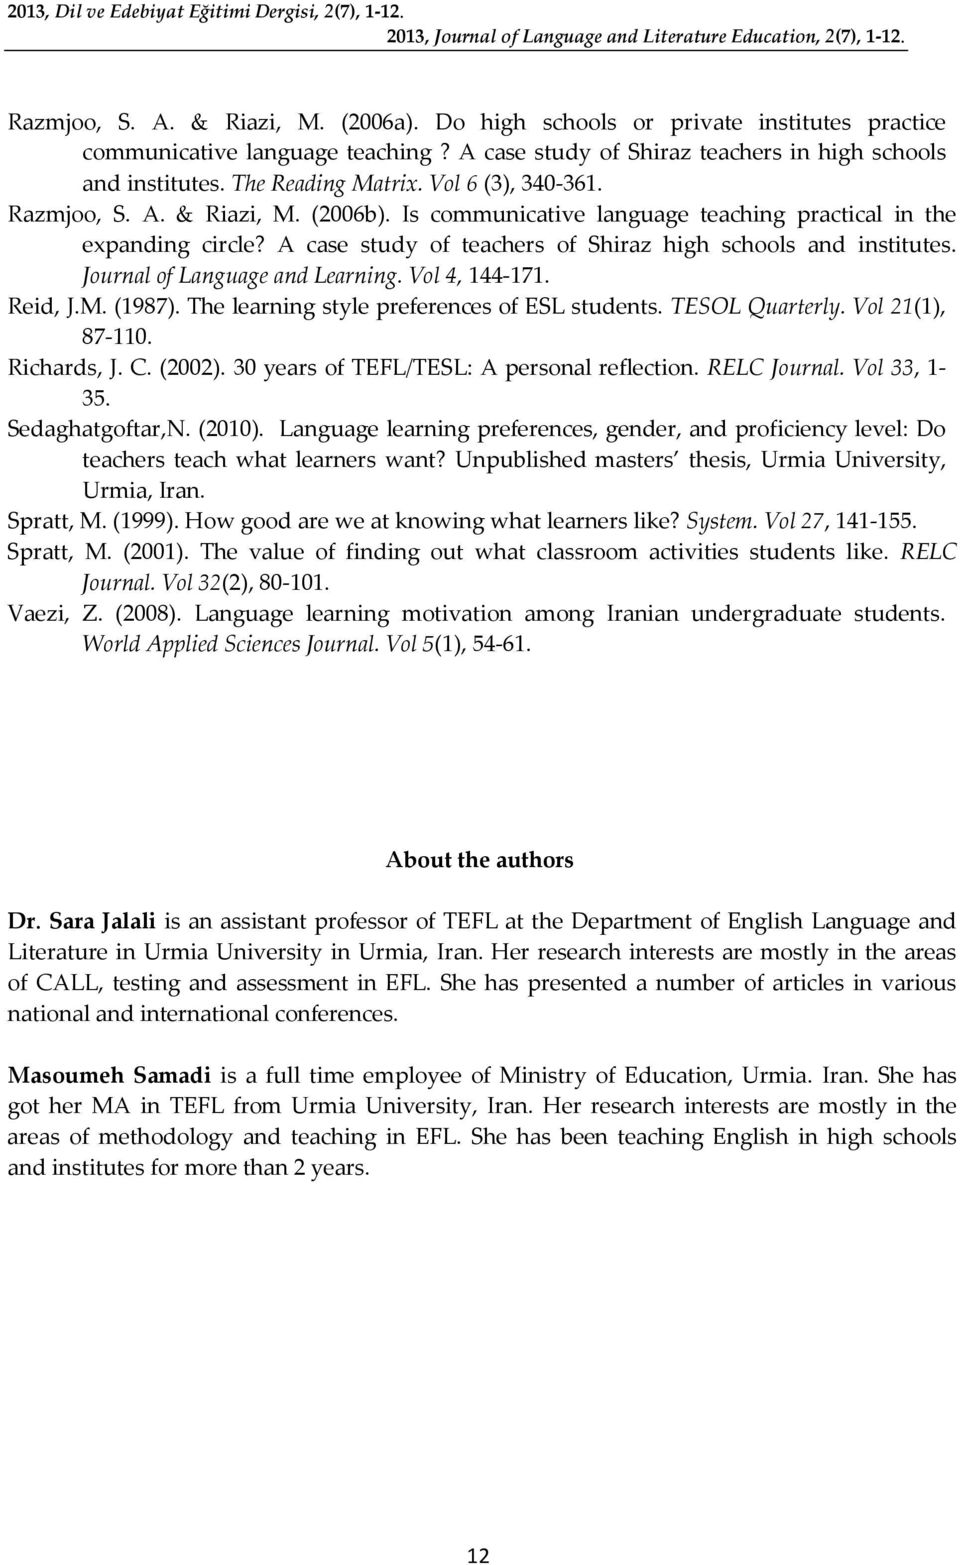 (2006b). Is communicative language teaching practical in the expanding circle? A case study of teachers of Shiraz high schools and institutes. Journal of Language and Learning. Vol 4, 144-171.